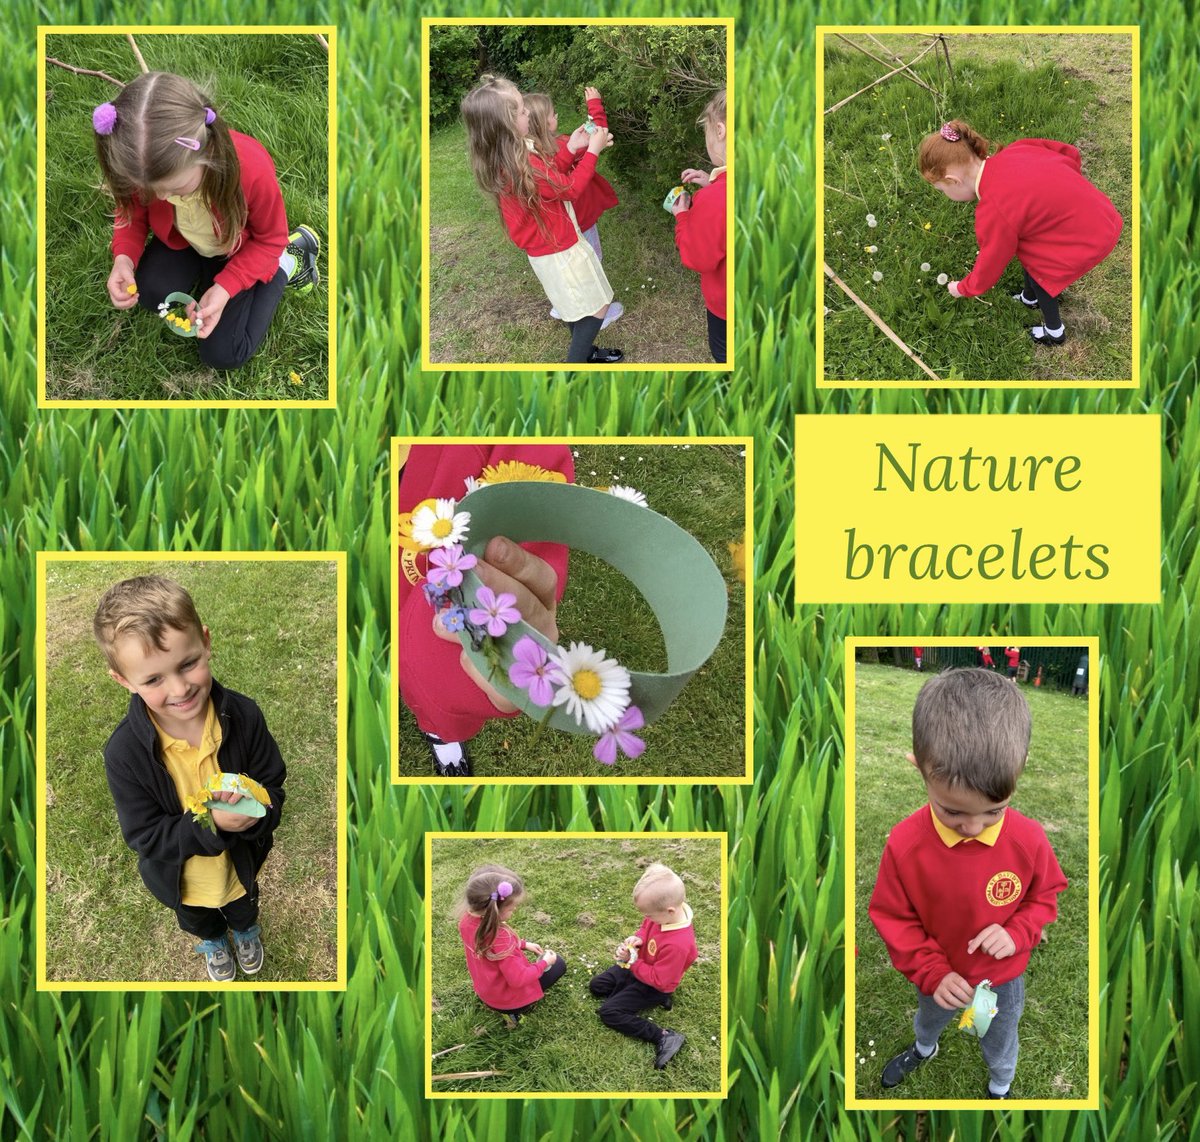 ‘Out and about’ hunting for Spring and Summer flowers today and using them to make beautiful nature bracelets. 🌼🌸🌺 We discussed and compared them to the nature crowns that we made in the Autumn! #sdpsy1 #topic #seasonalchanges #nature #outdoorlearning